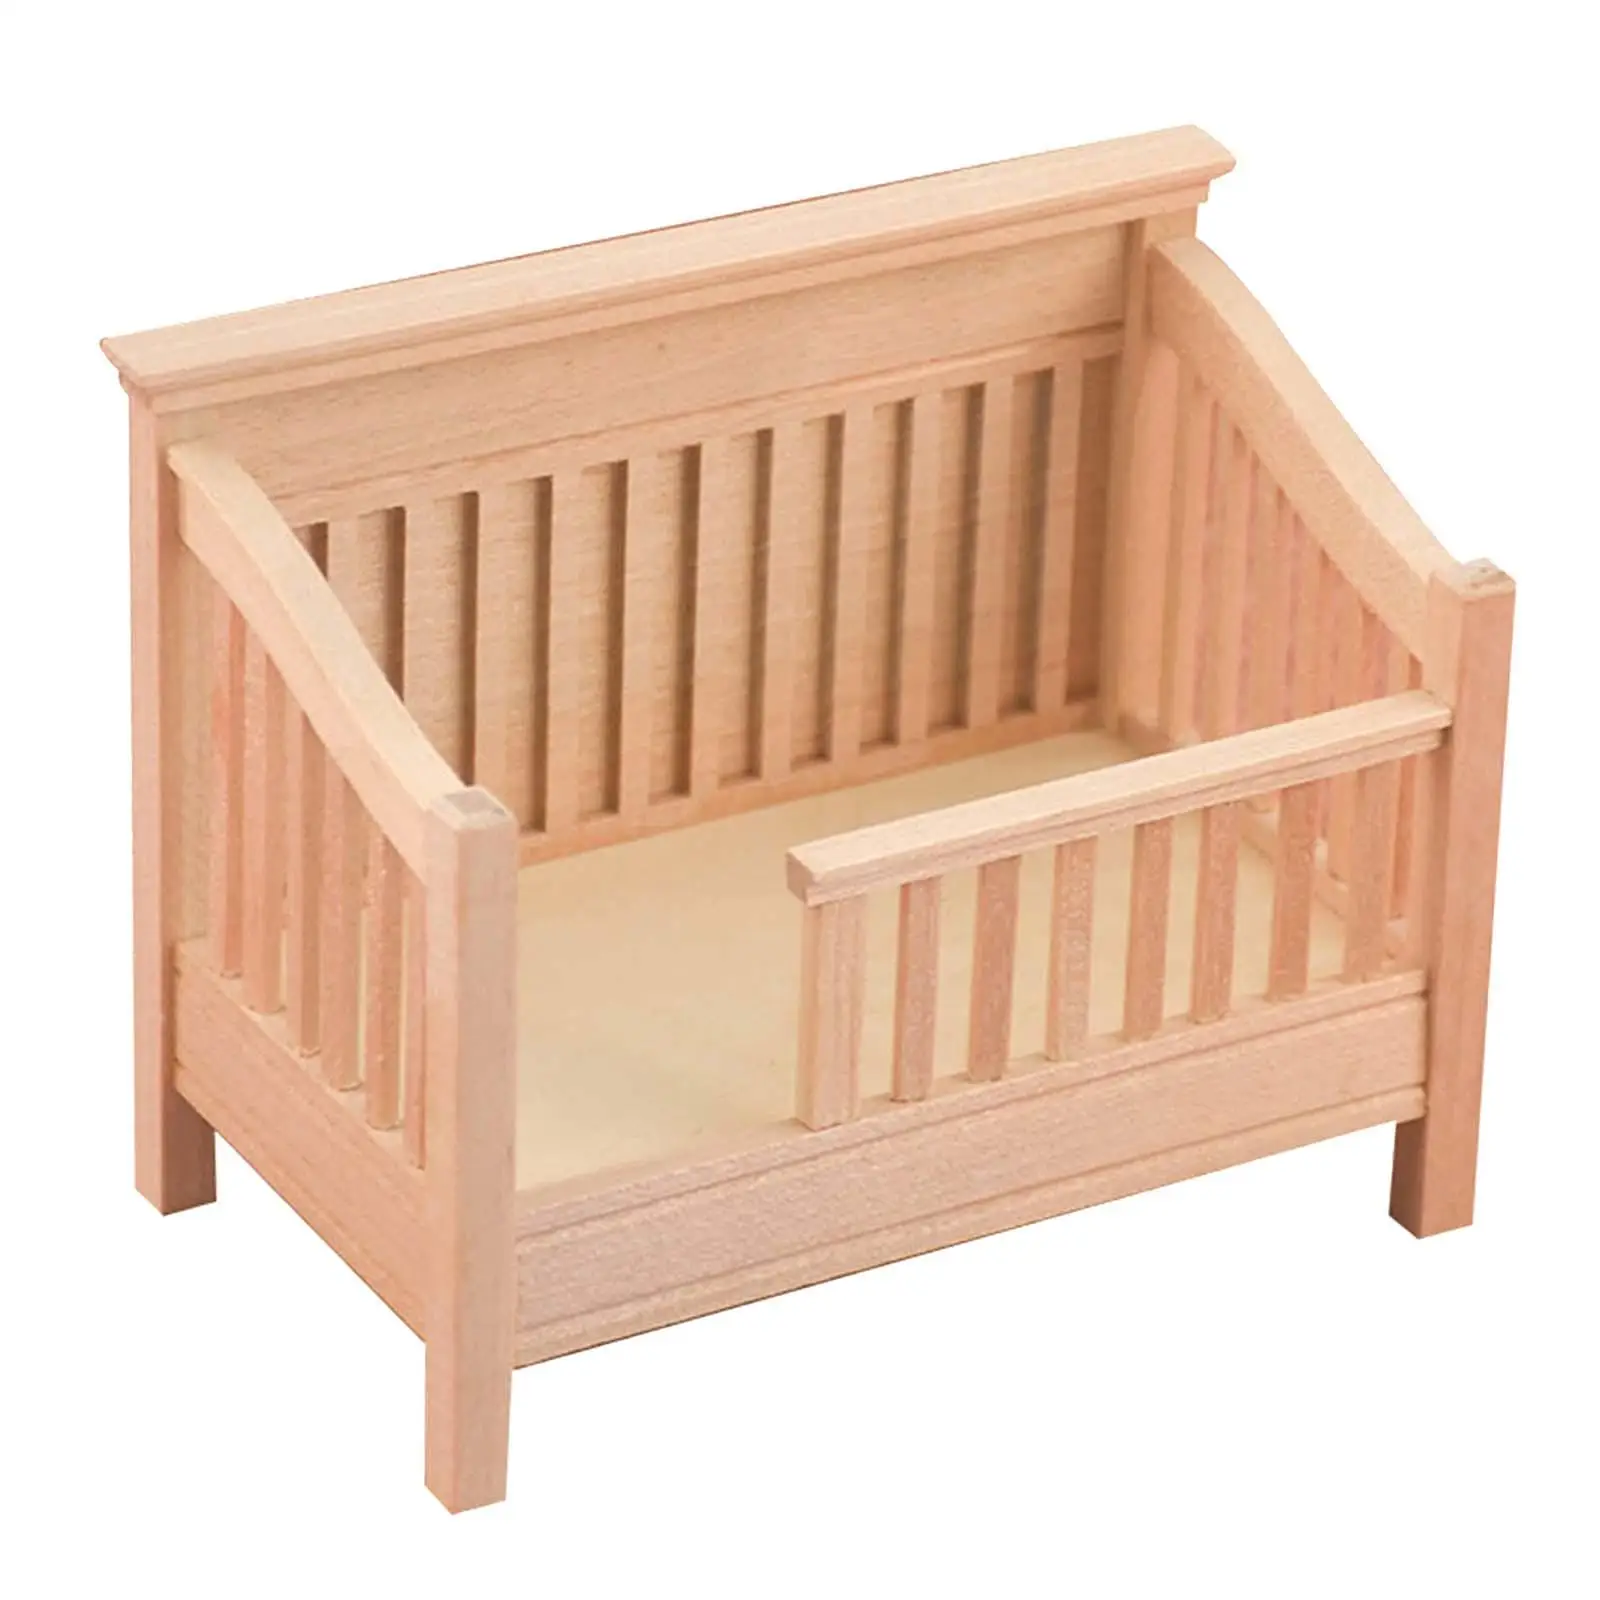 

1:12 Dollhouse Wooden Crib Miniature Furniture Pretend Play Baby Doll Cradle Bed Unpainted Handmade DIY Crafts for Accessories